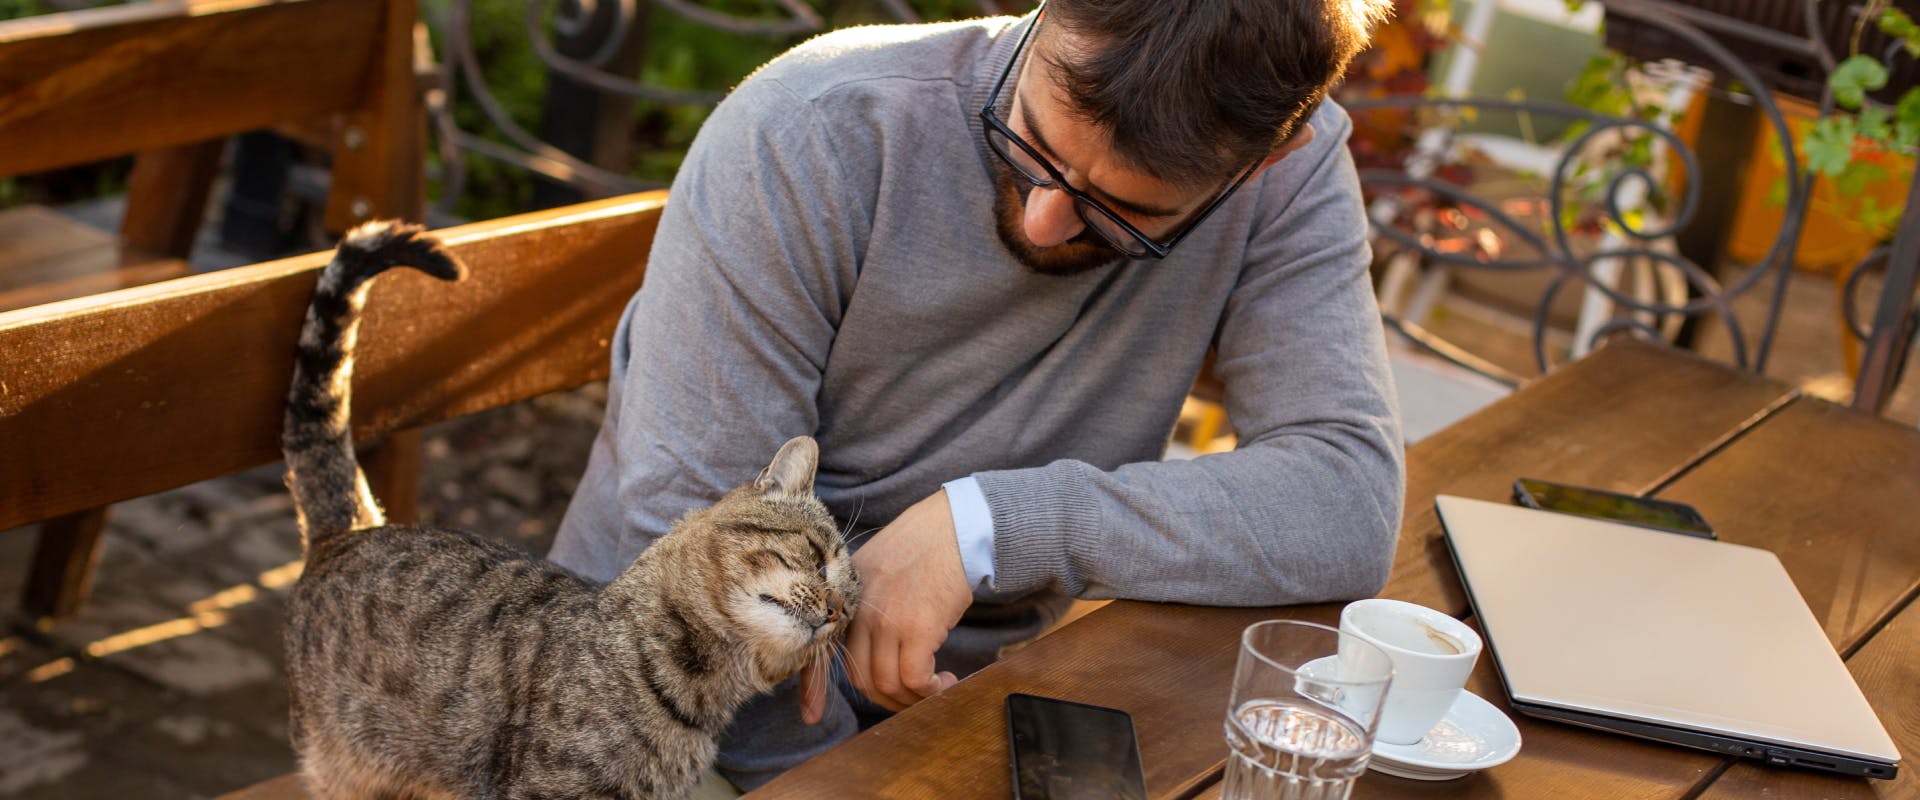 A cat rubs up against someone in a cafe.